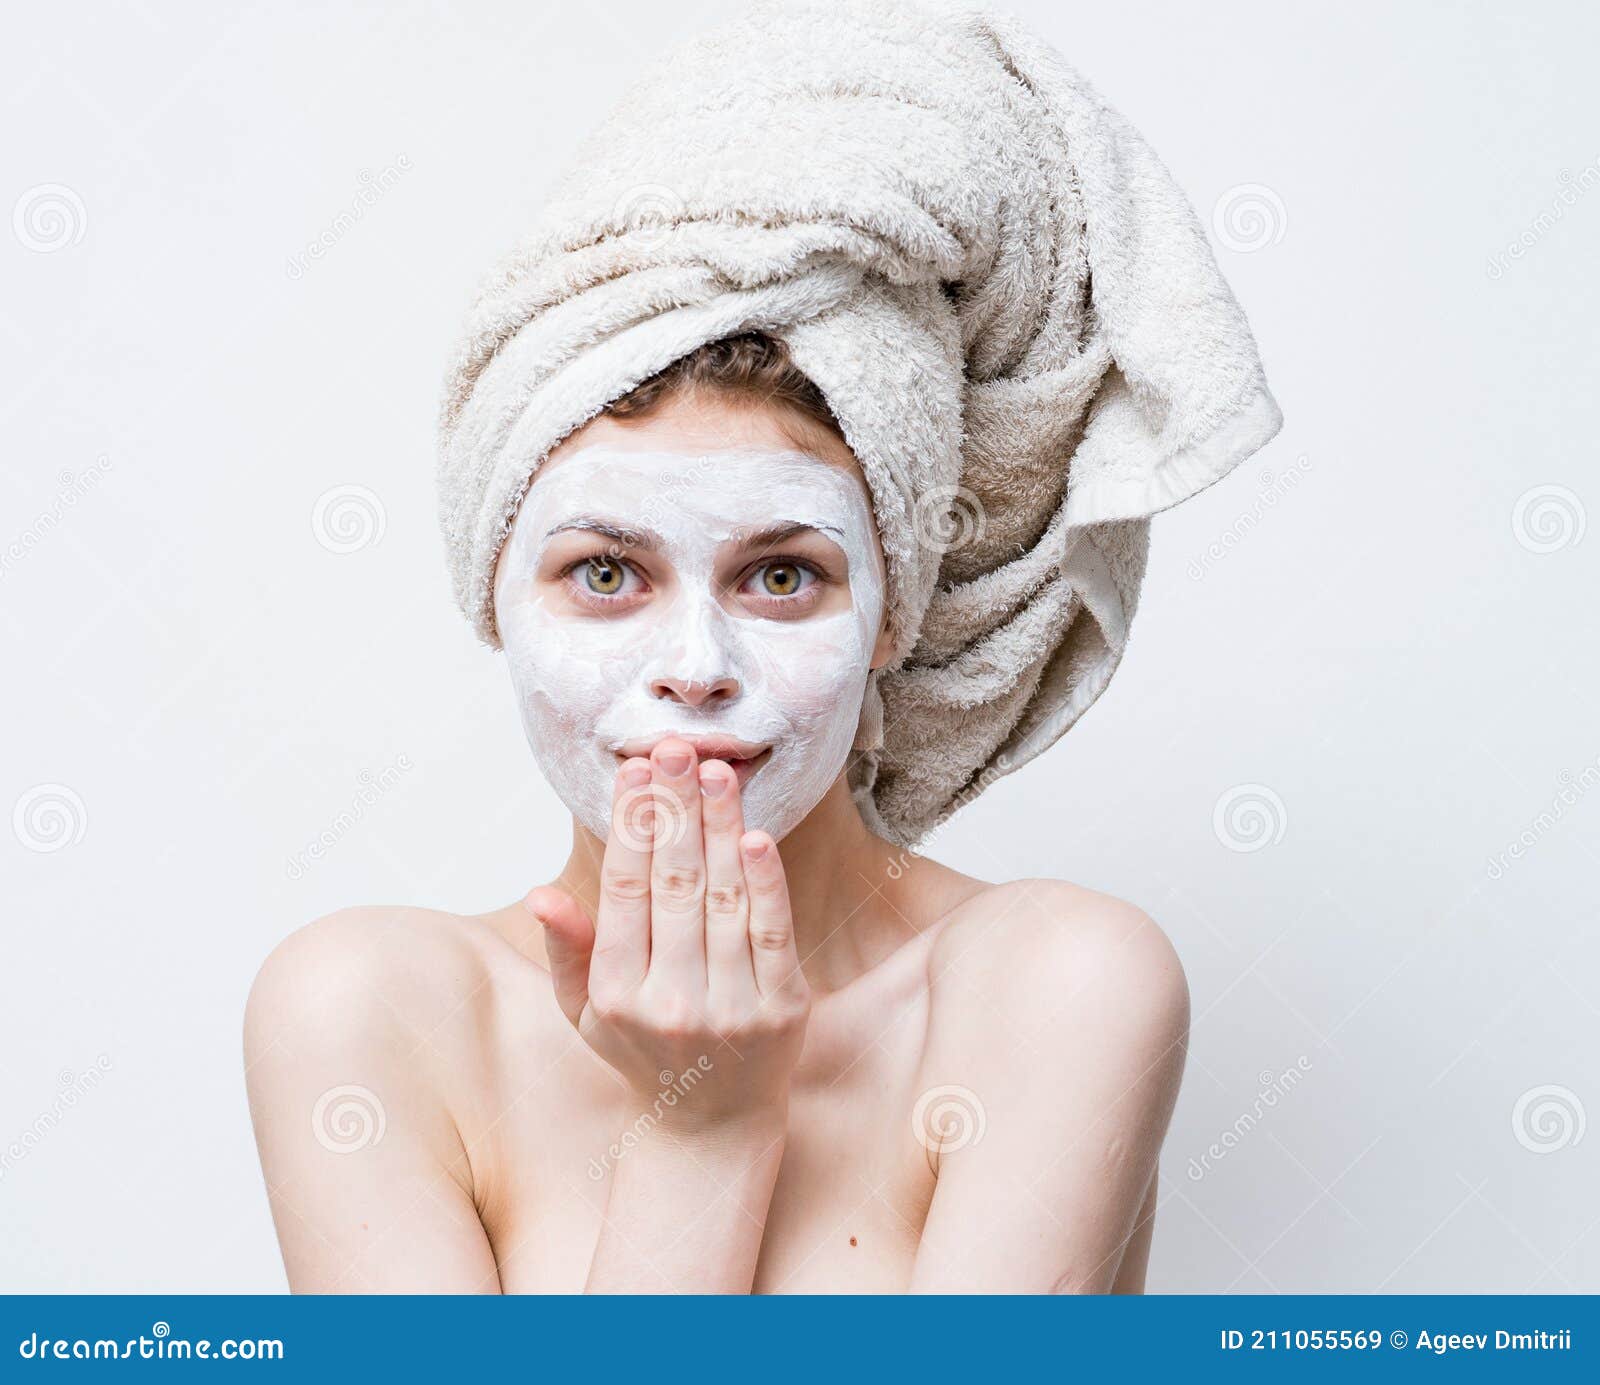 Pretty Woman With A Towel On Her Head And A White Mask Against Black Dots On Her Face Stock